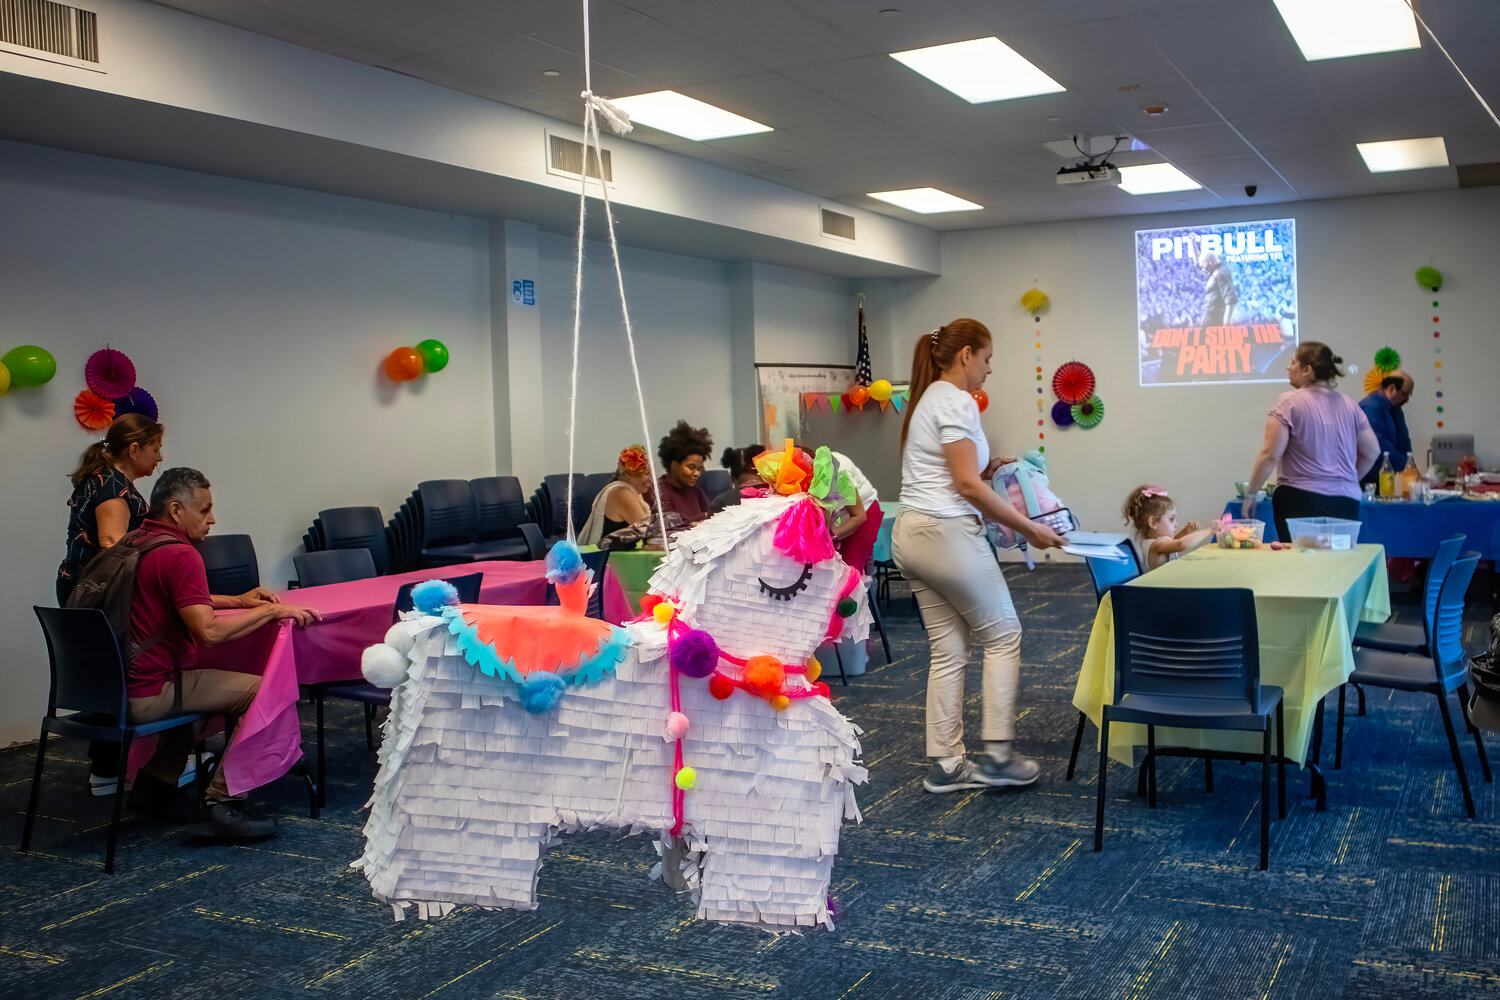 One of the highlights of the event was the large piñata.